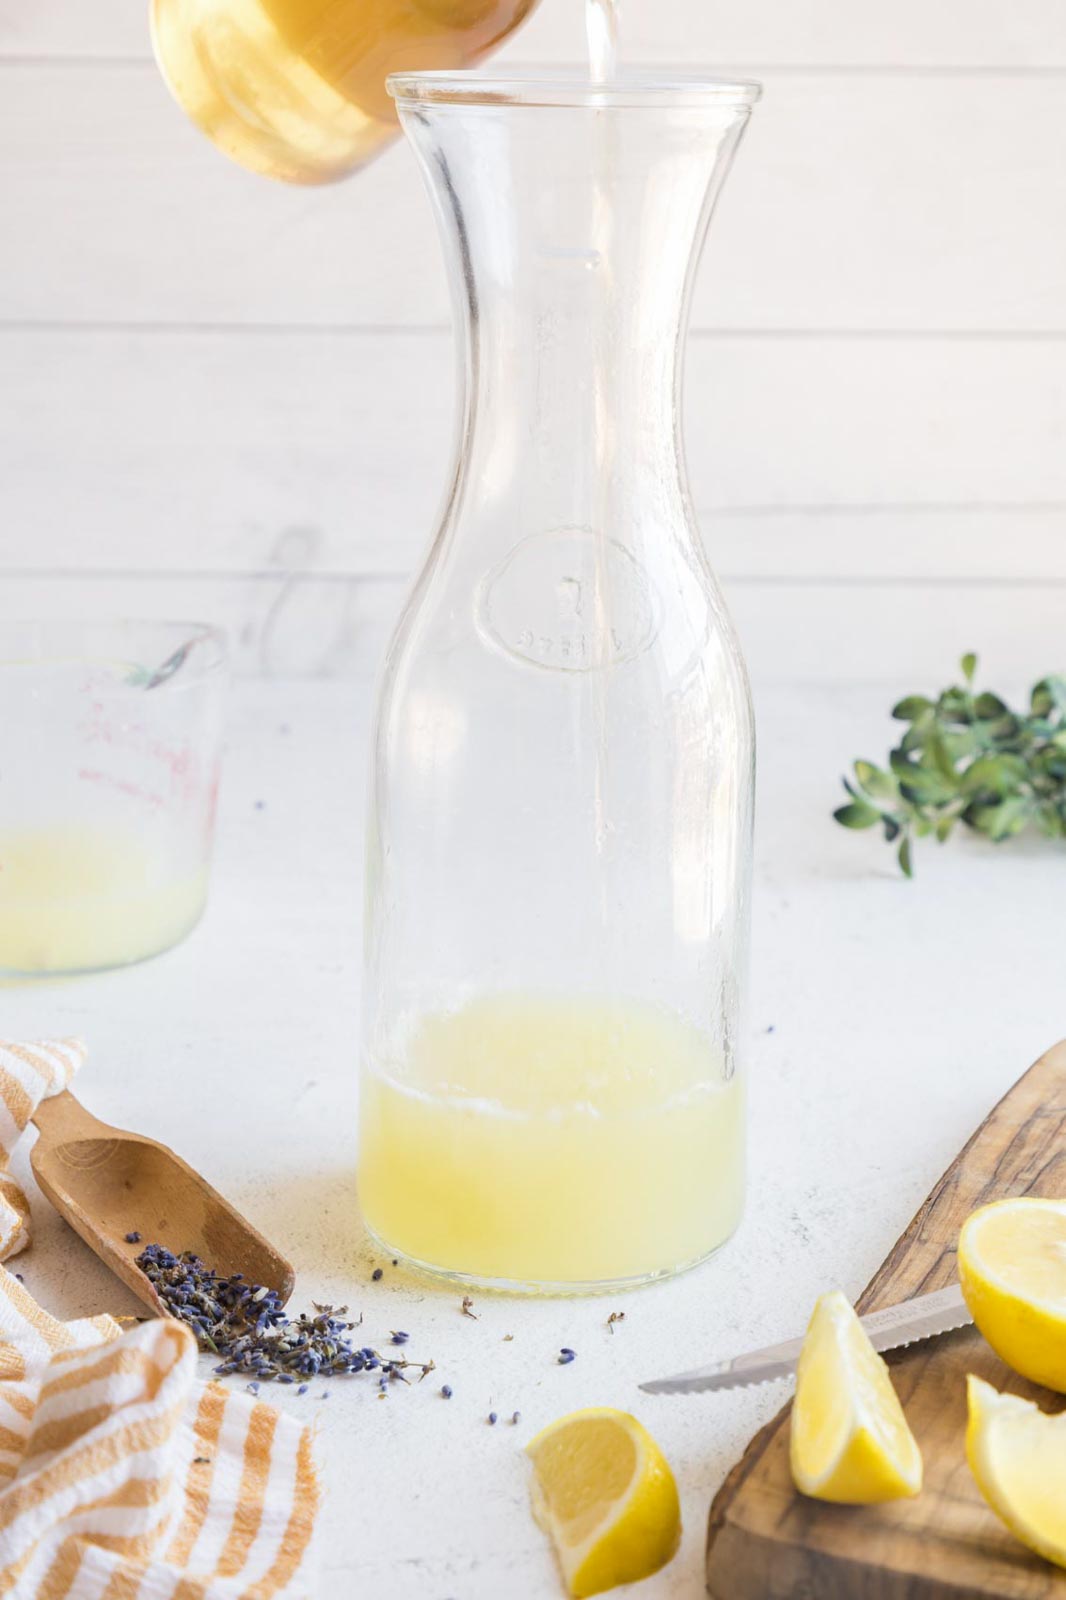 Pouring lavender simple syrup into freshly squeezed lemon juice.